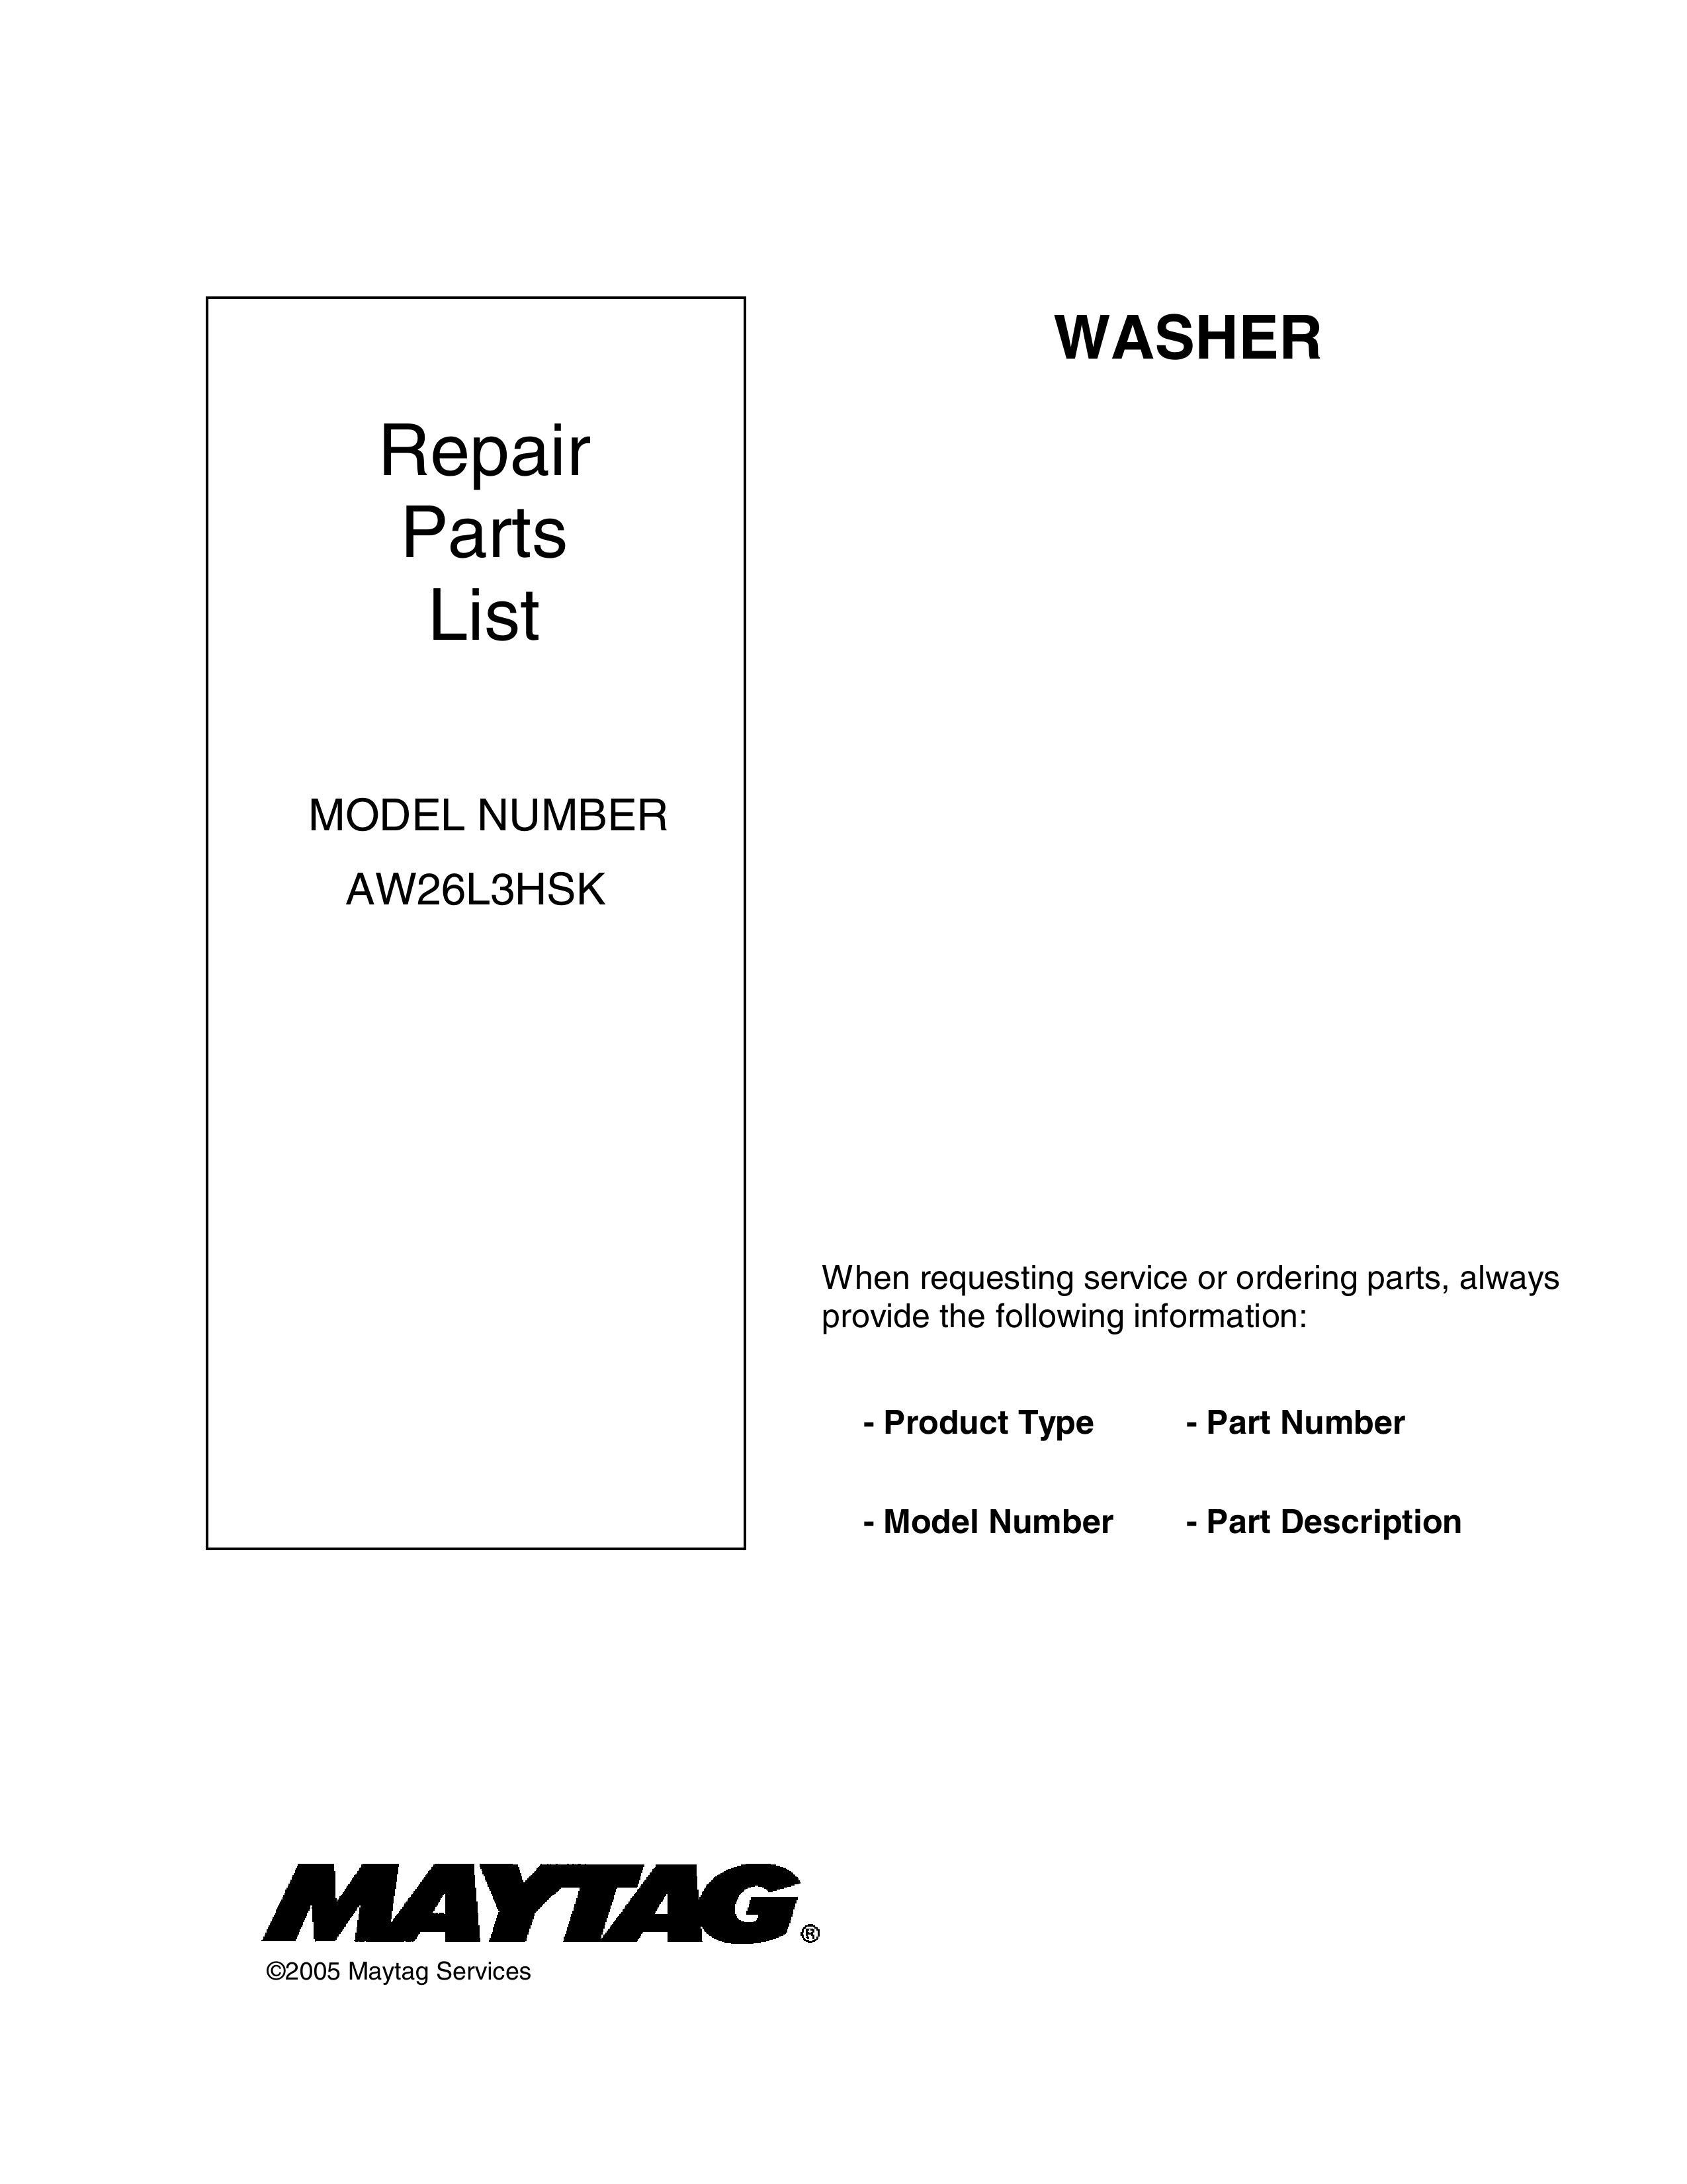 Maytag AW26L3HSK Washer User Manual